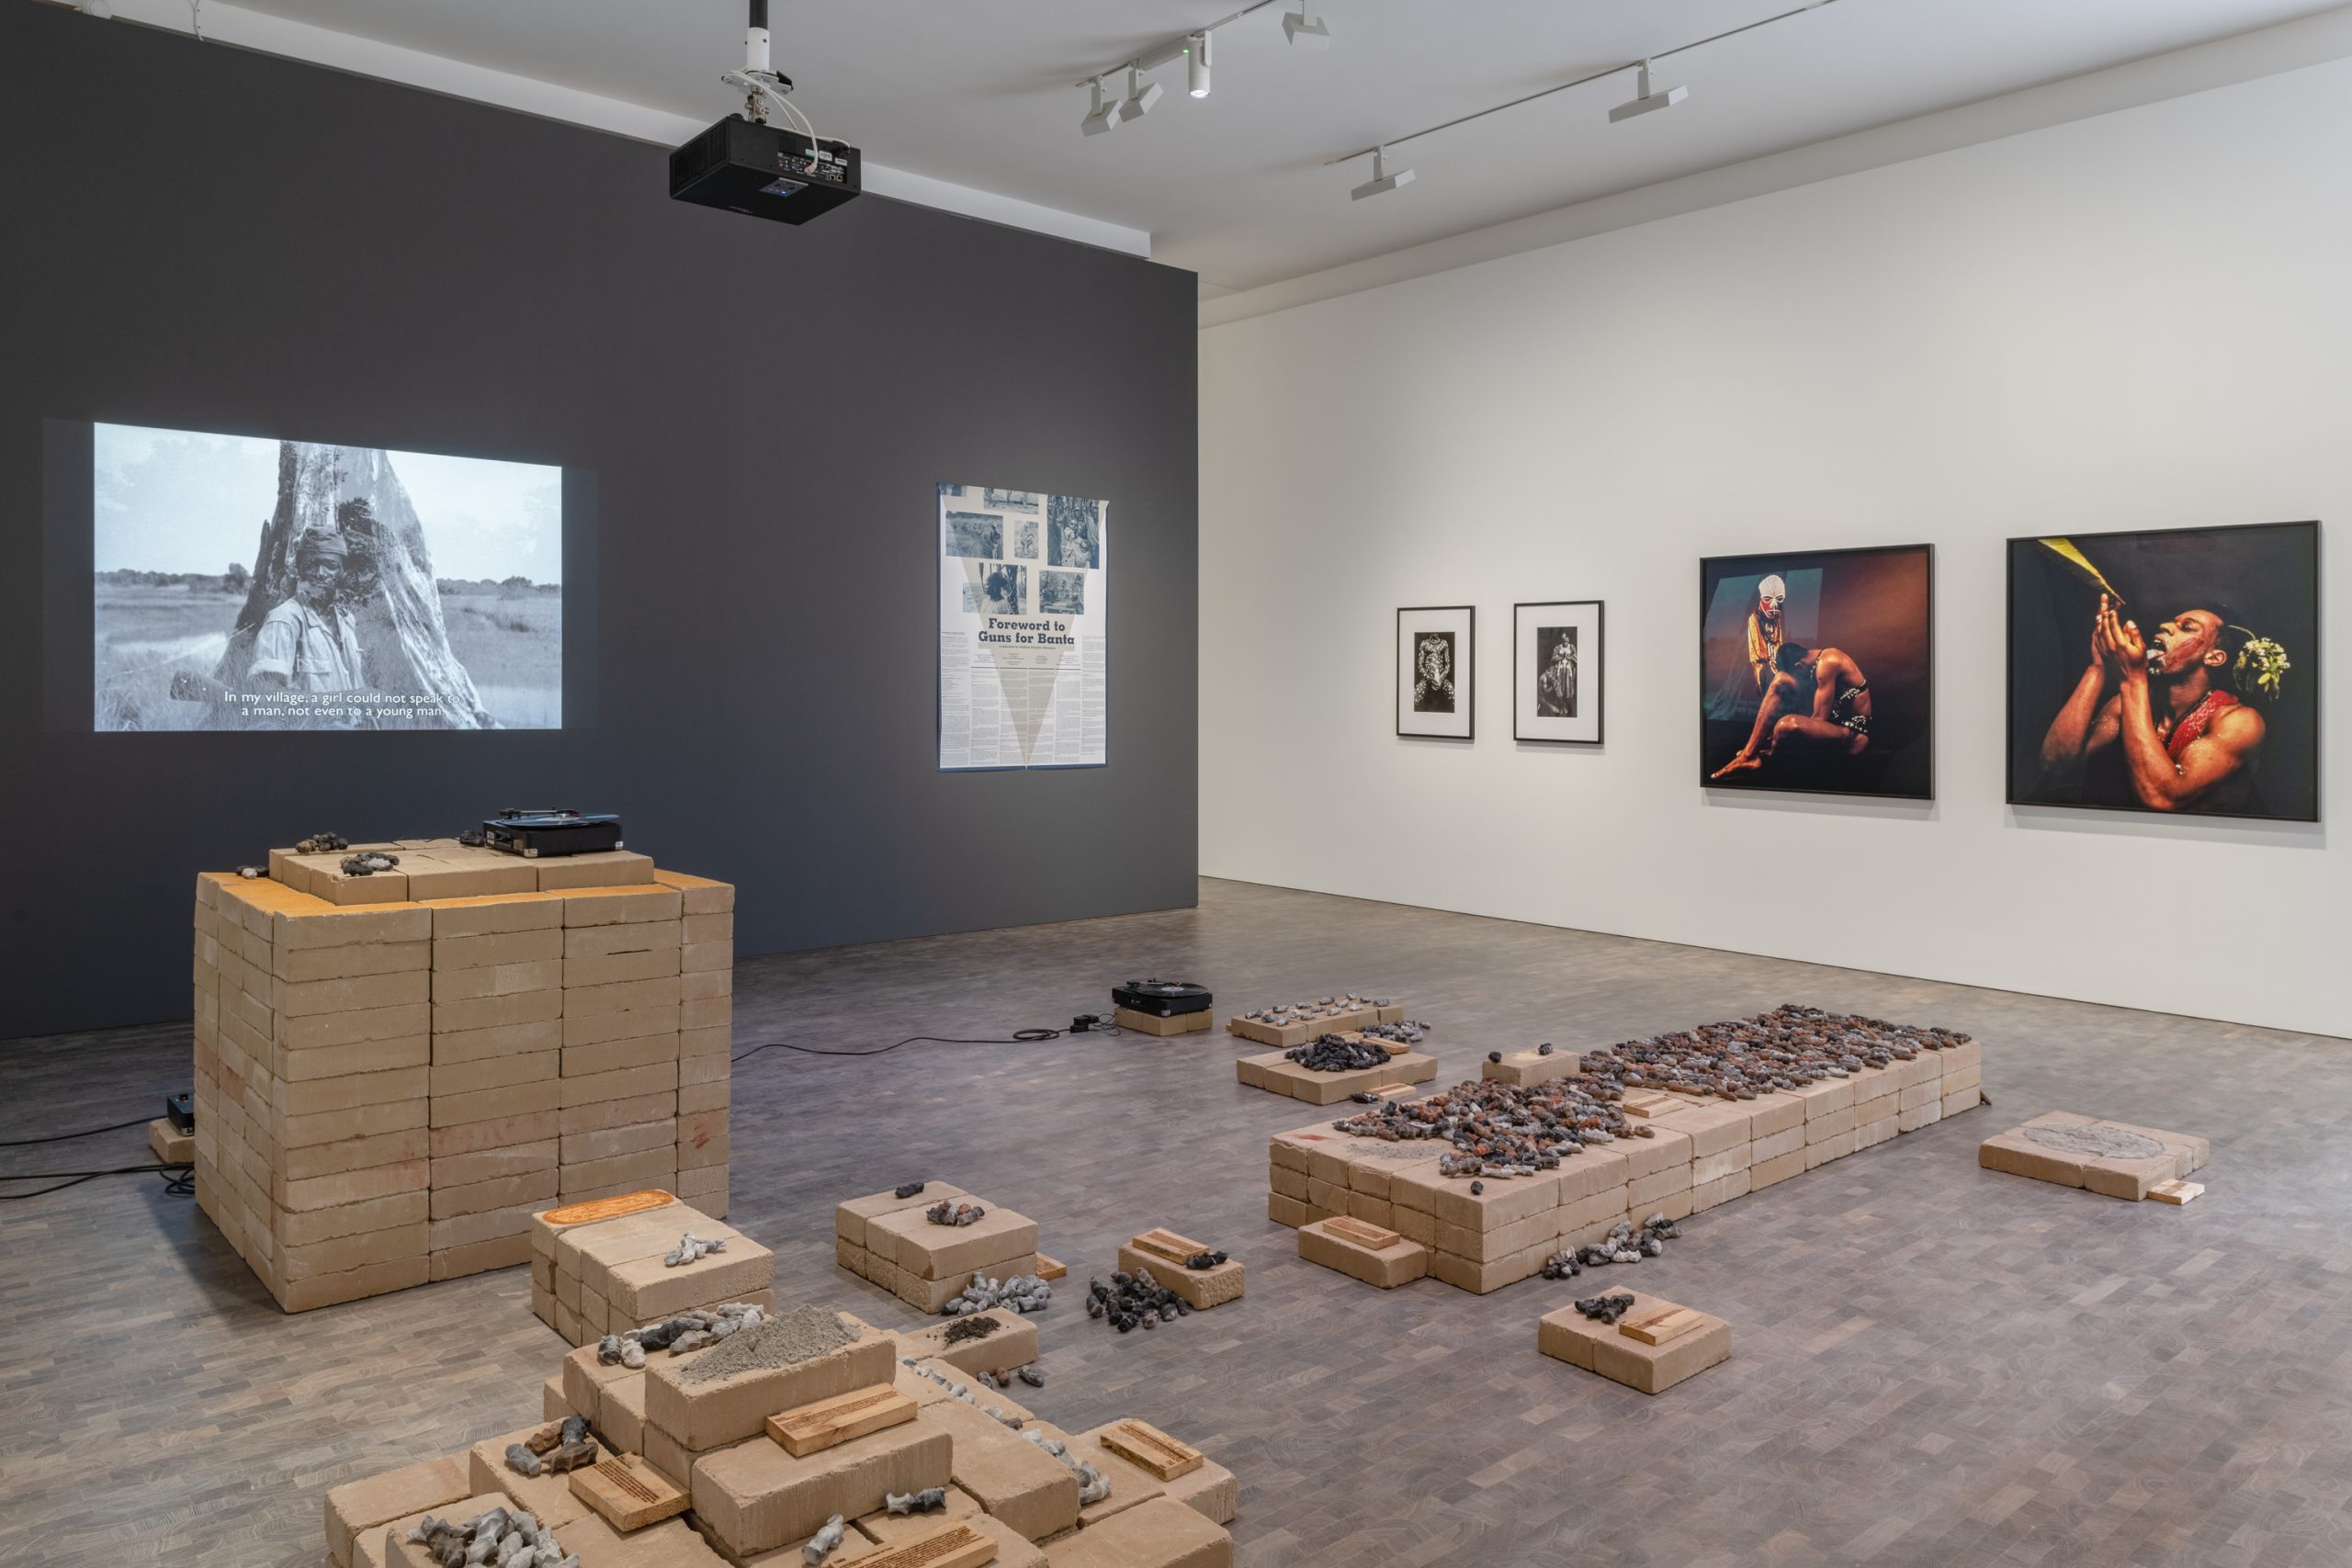 Installation View, 'Living With Ghosts' Guest Curated by Kojo Abudu, July 8 – August 5, 2022, Pace Gallery, London. Photo: Damian Griffiths, courtesy Pace Gallery